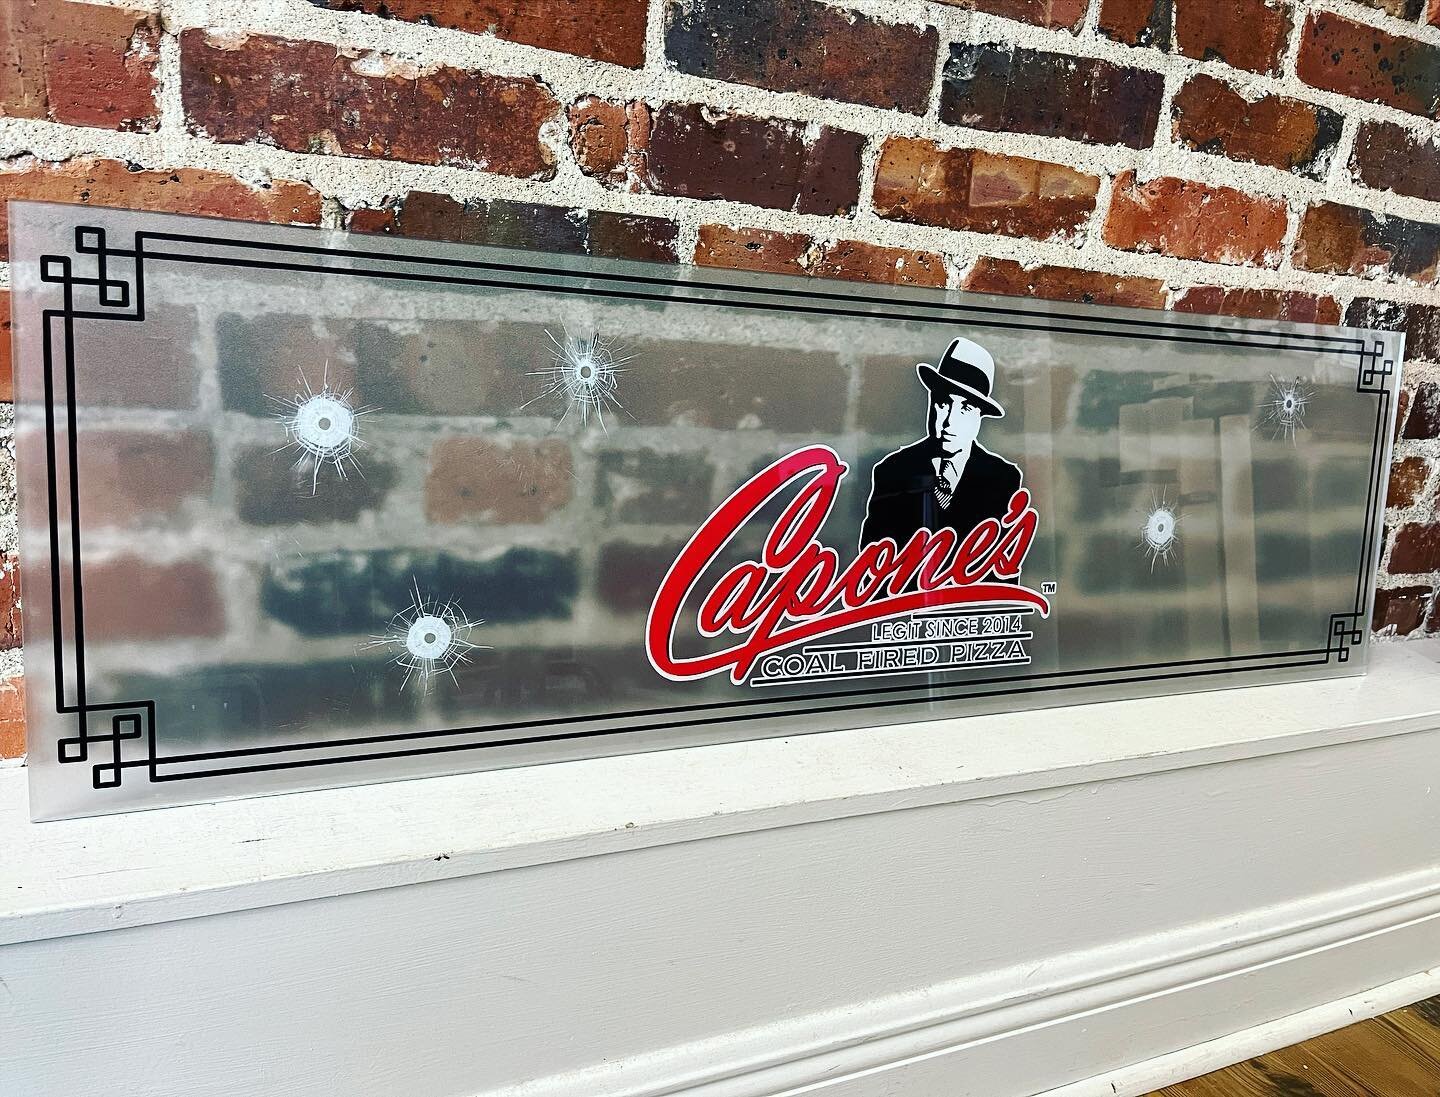 We love these opaque frosted acrylics for @caponescoalfiredpizza in downtown Fort Myers. #print #design #creative